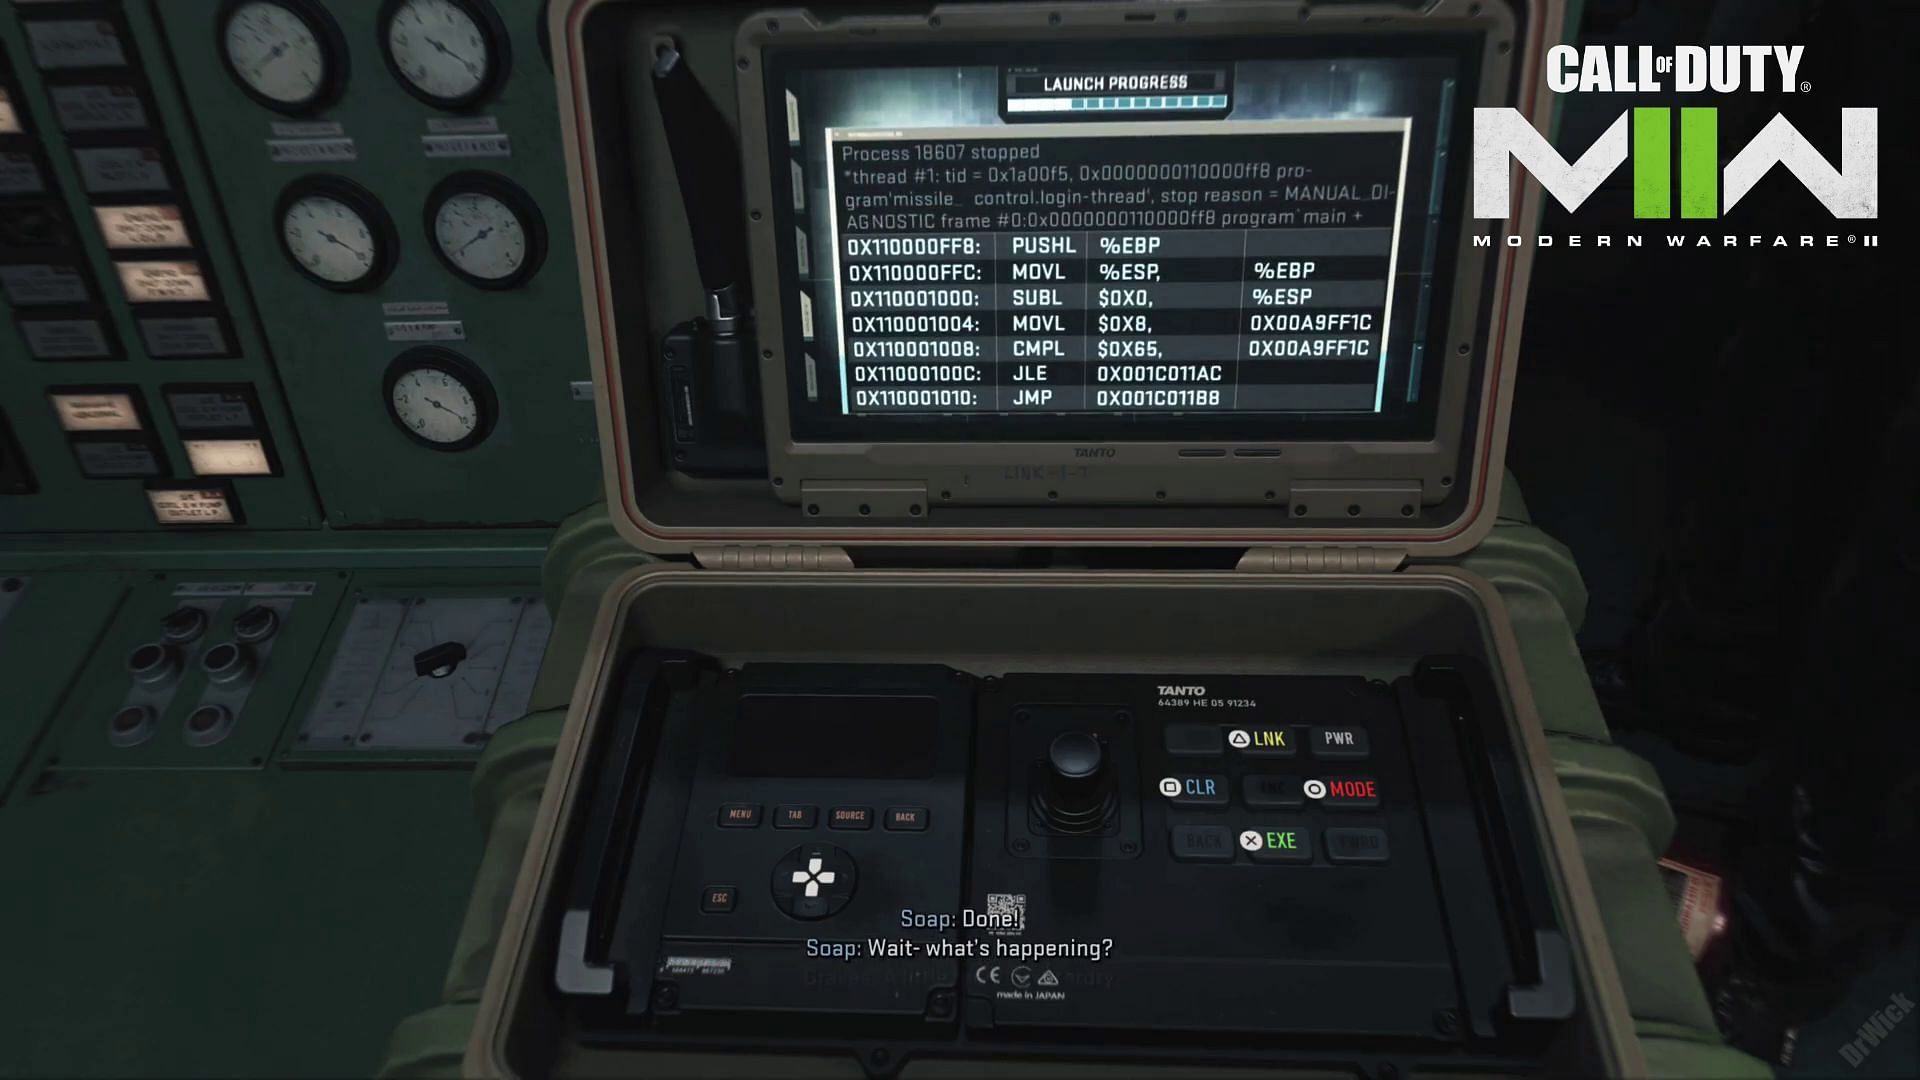 Follow Laswell&#039;s instructions to execute Missile controls (image via Activision)